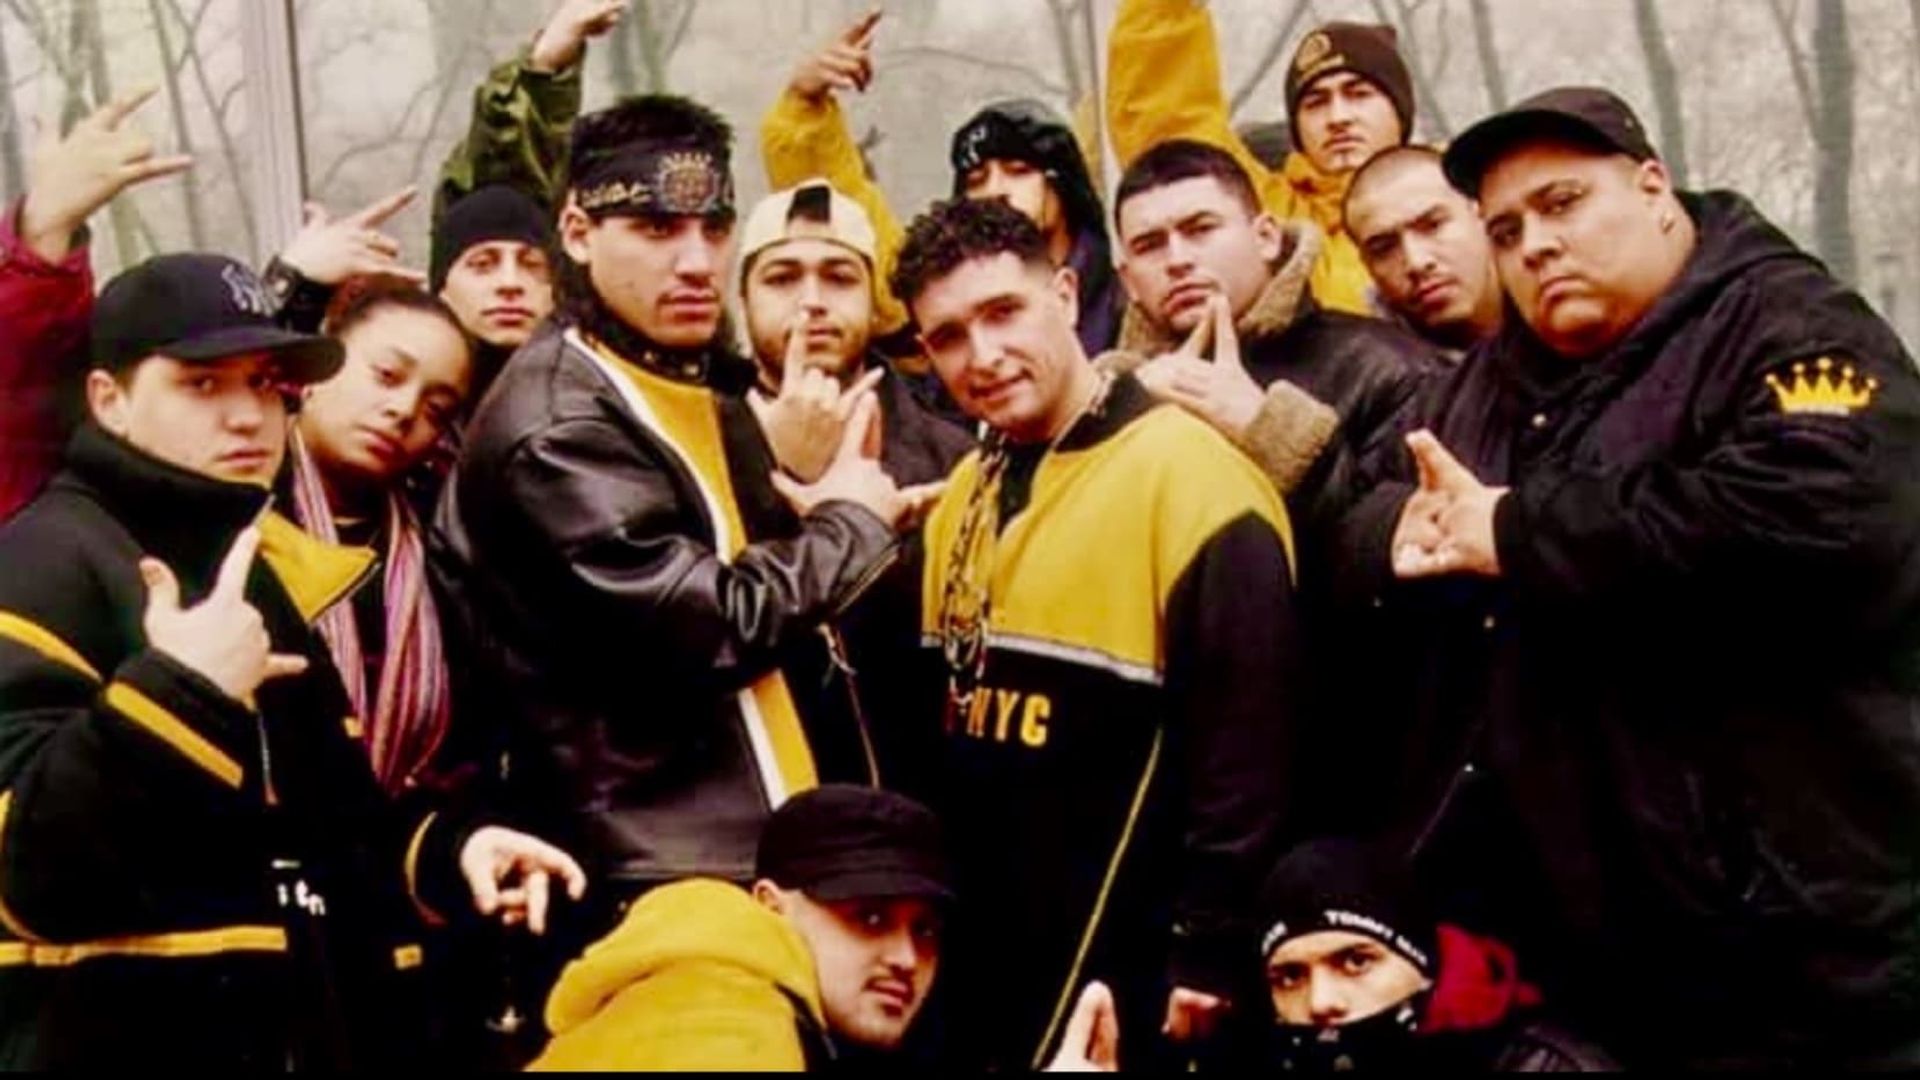 Latin Kings: A Street Gang Story background